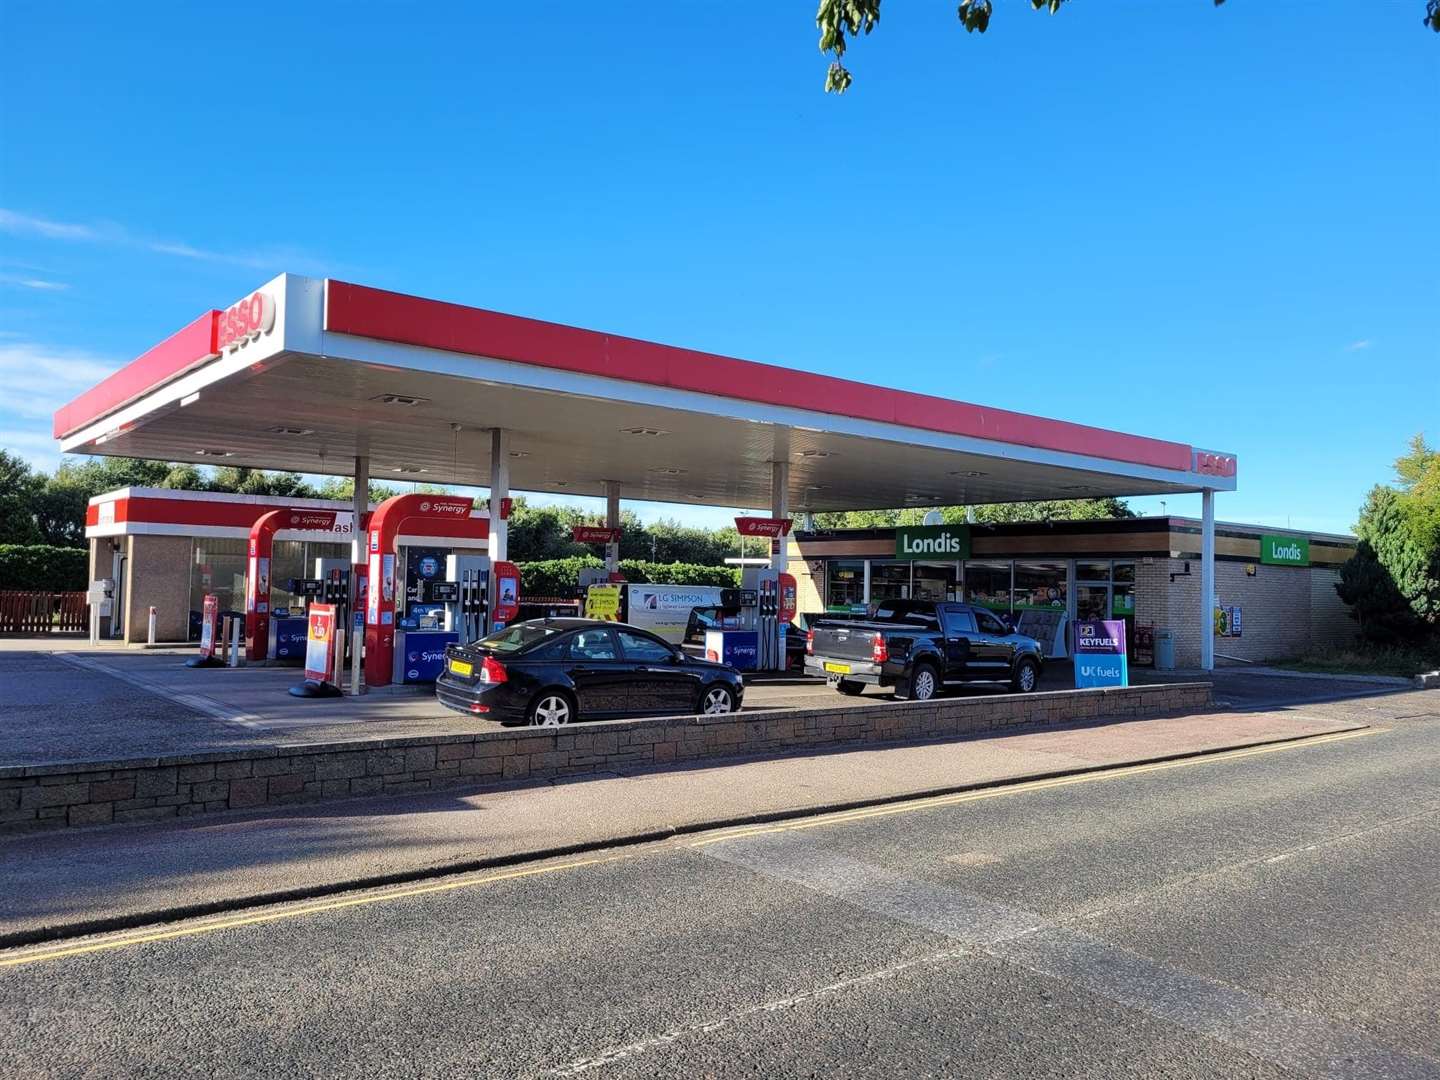 The Greshop Filling Station on Nairn Road.